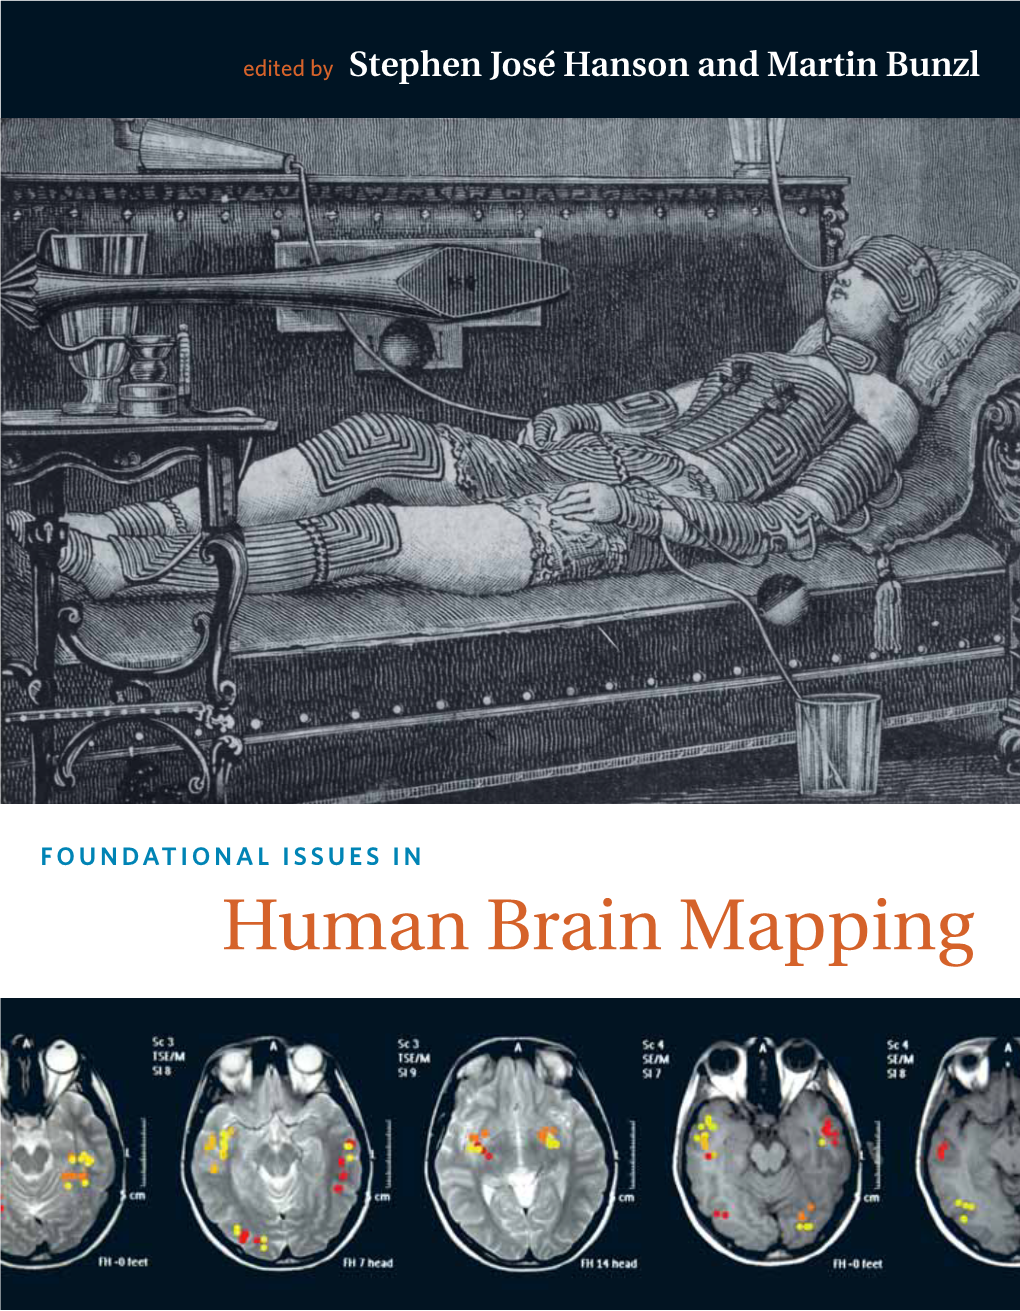 Human Brain Mapping Foundational Issues in Human Brain Mapping